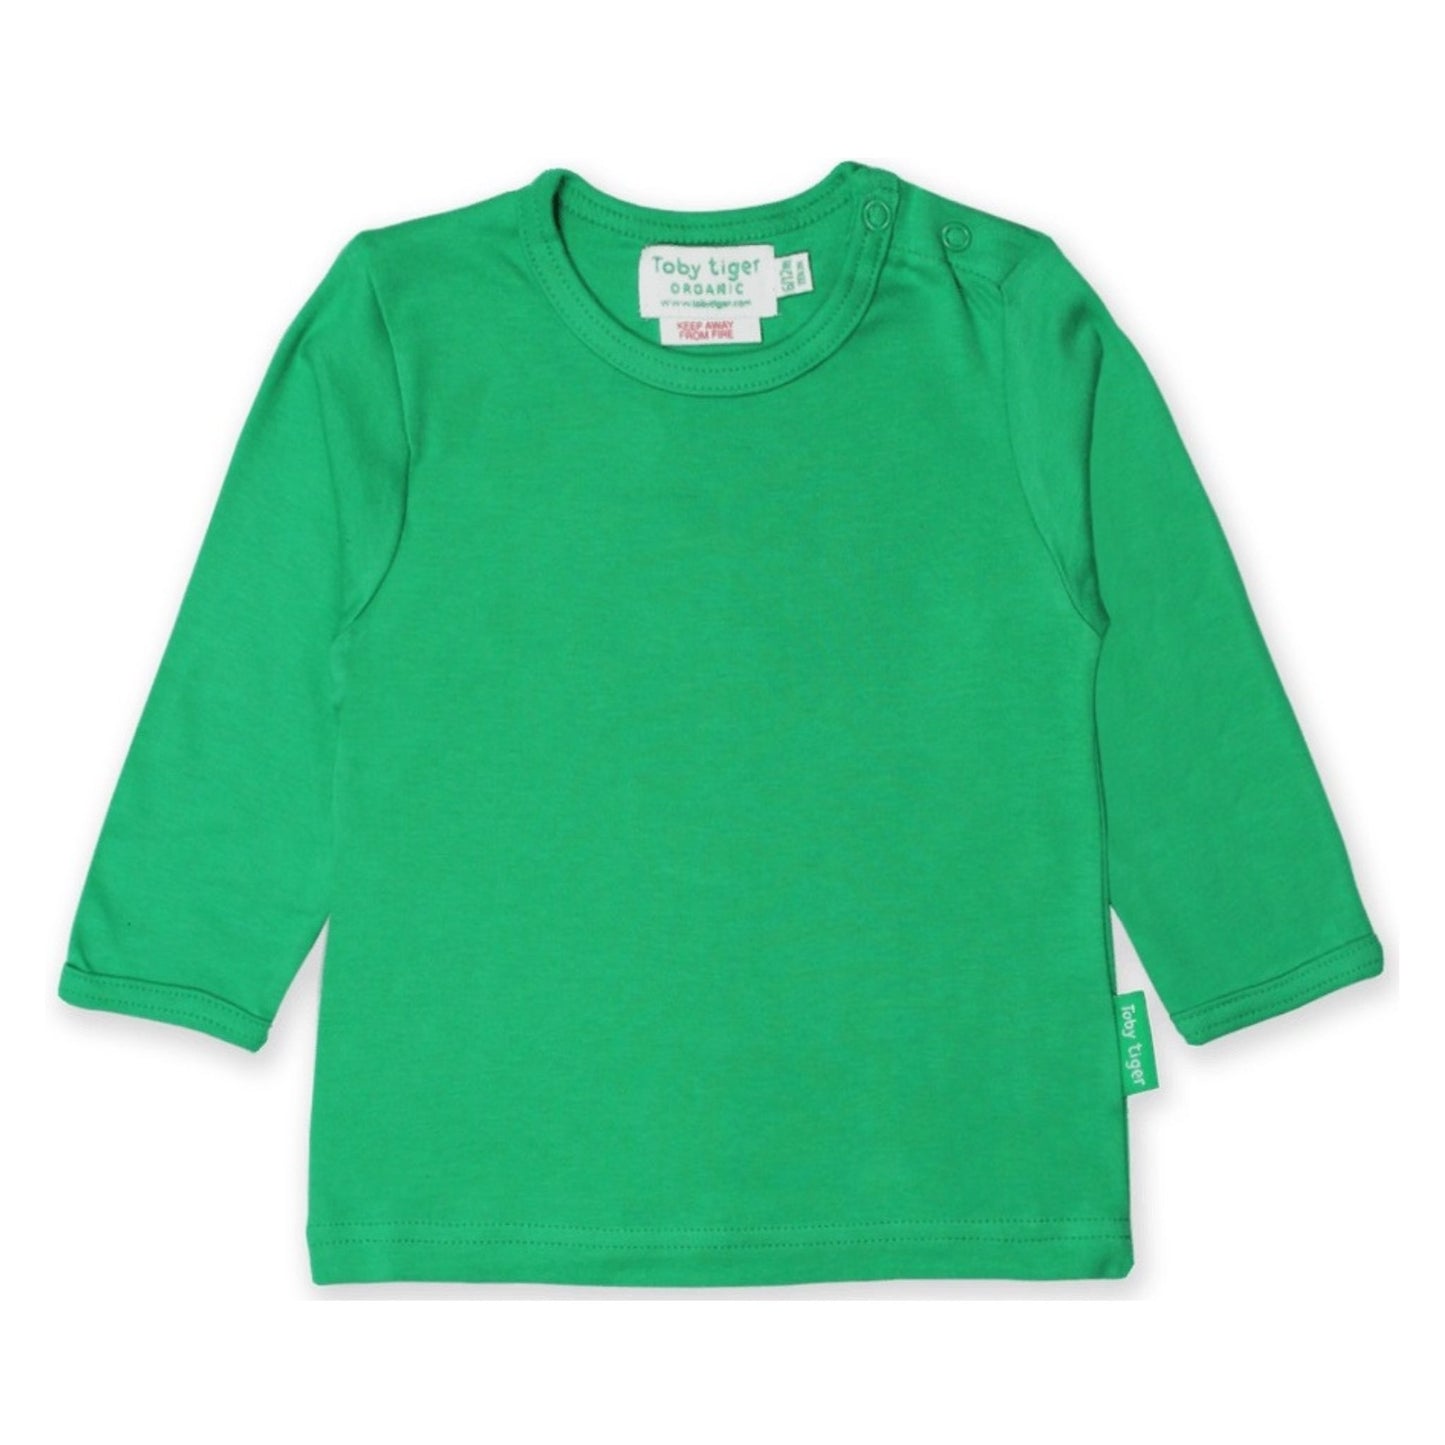 Toby Tiger long sleeve top - green